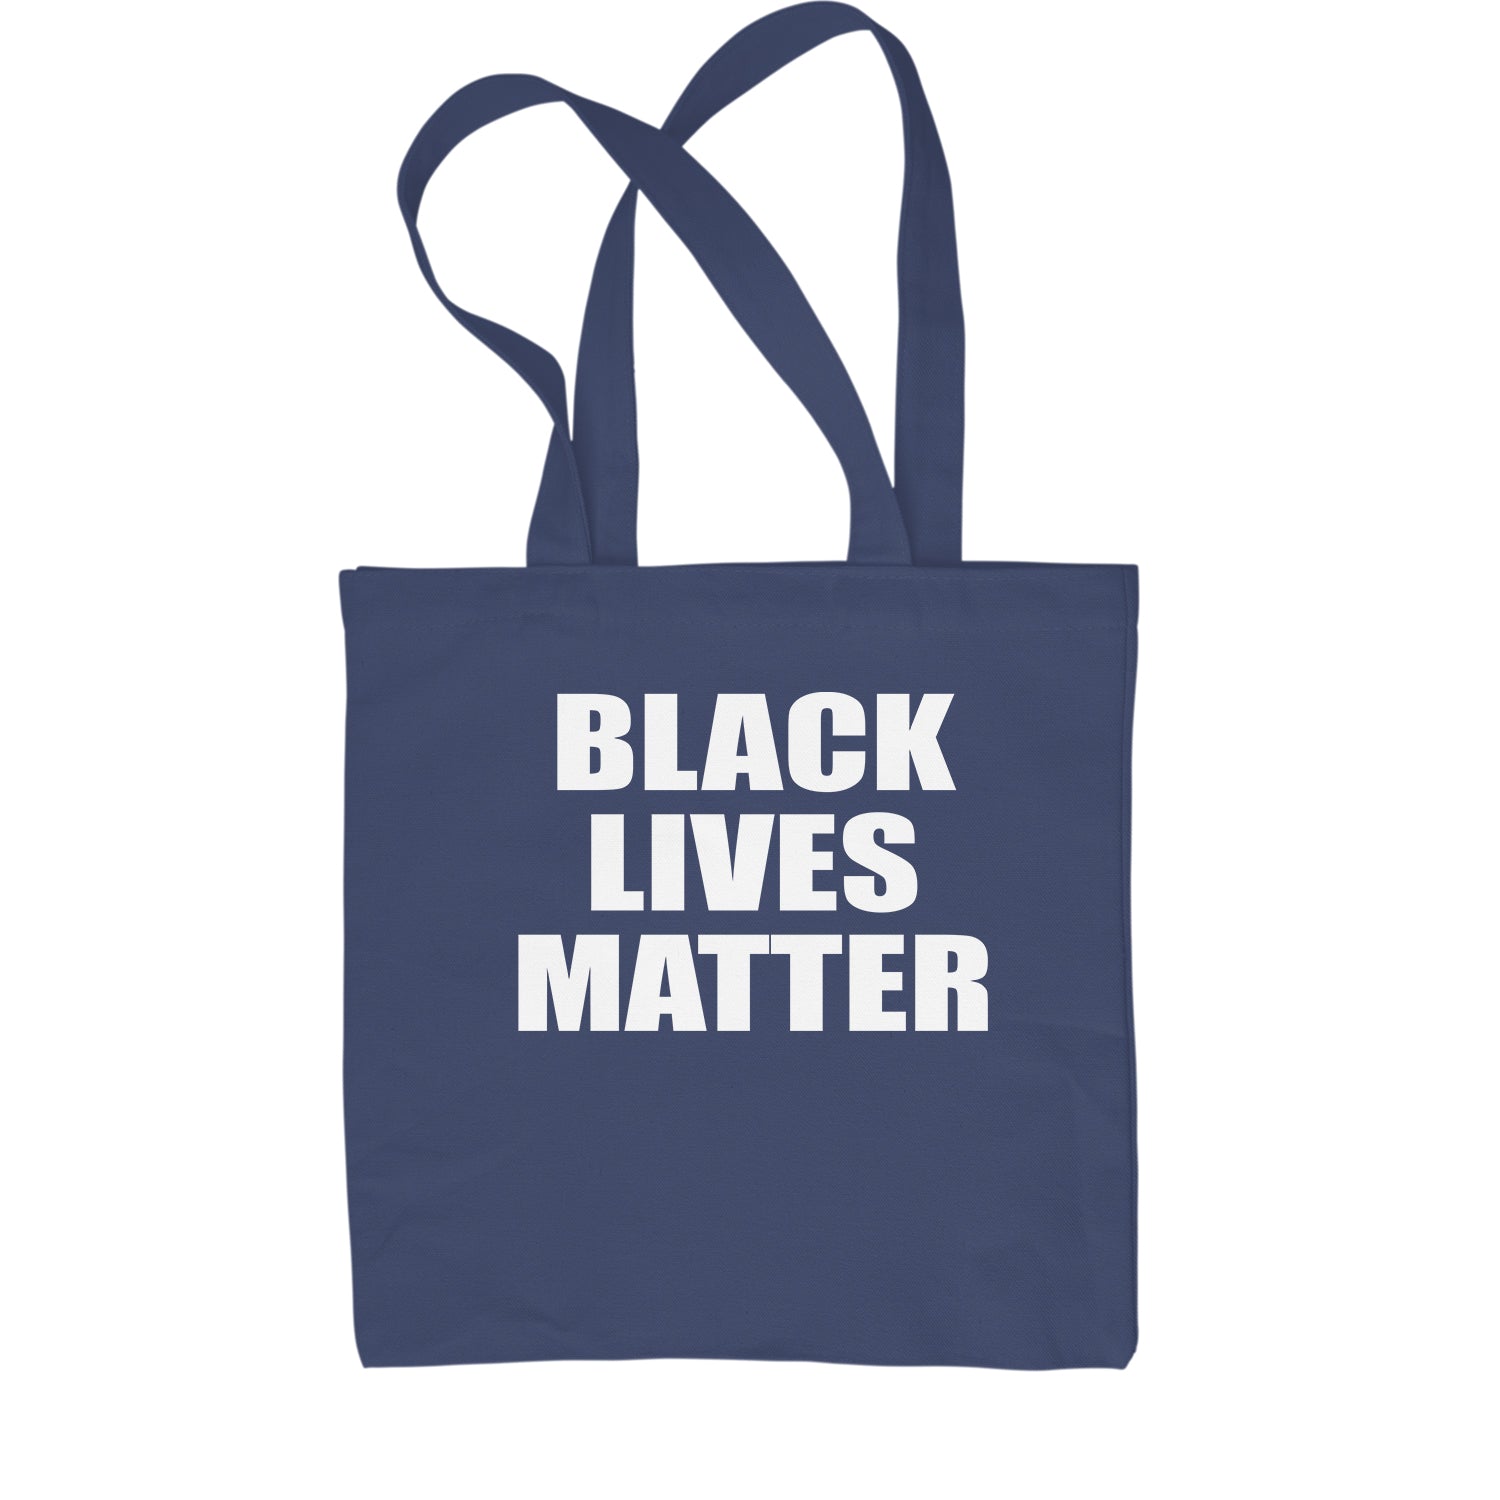 Black Lives Matter BLM Shopping Tote Bag african, africanamerican, ahmaud, american, arberry, breonna, brutality, end, justice, taylor by Expression Tees